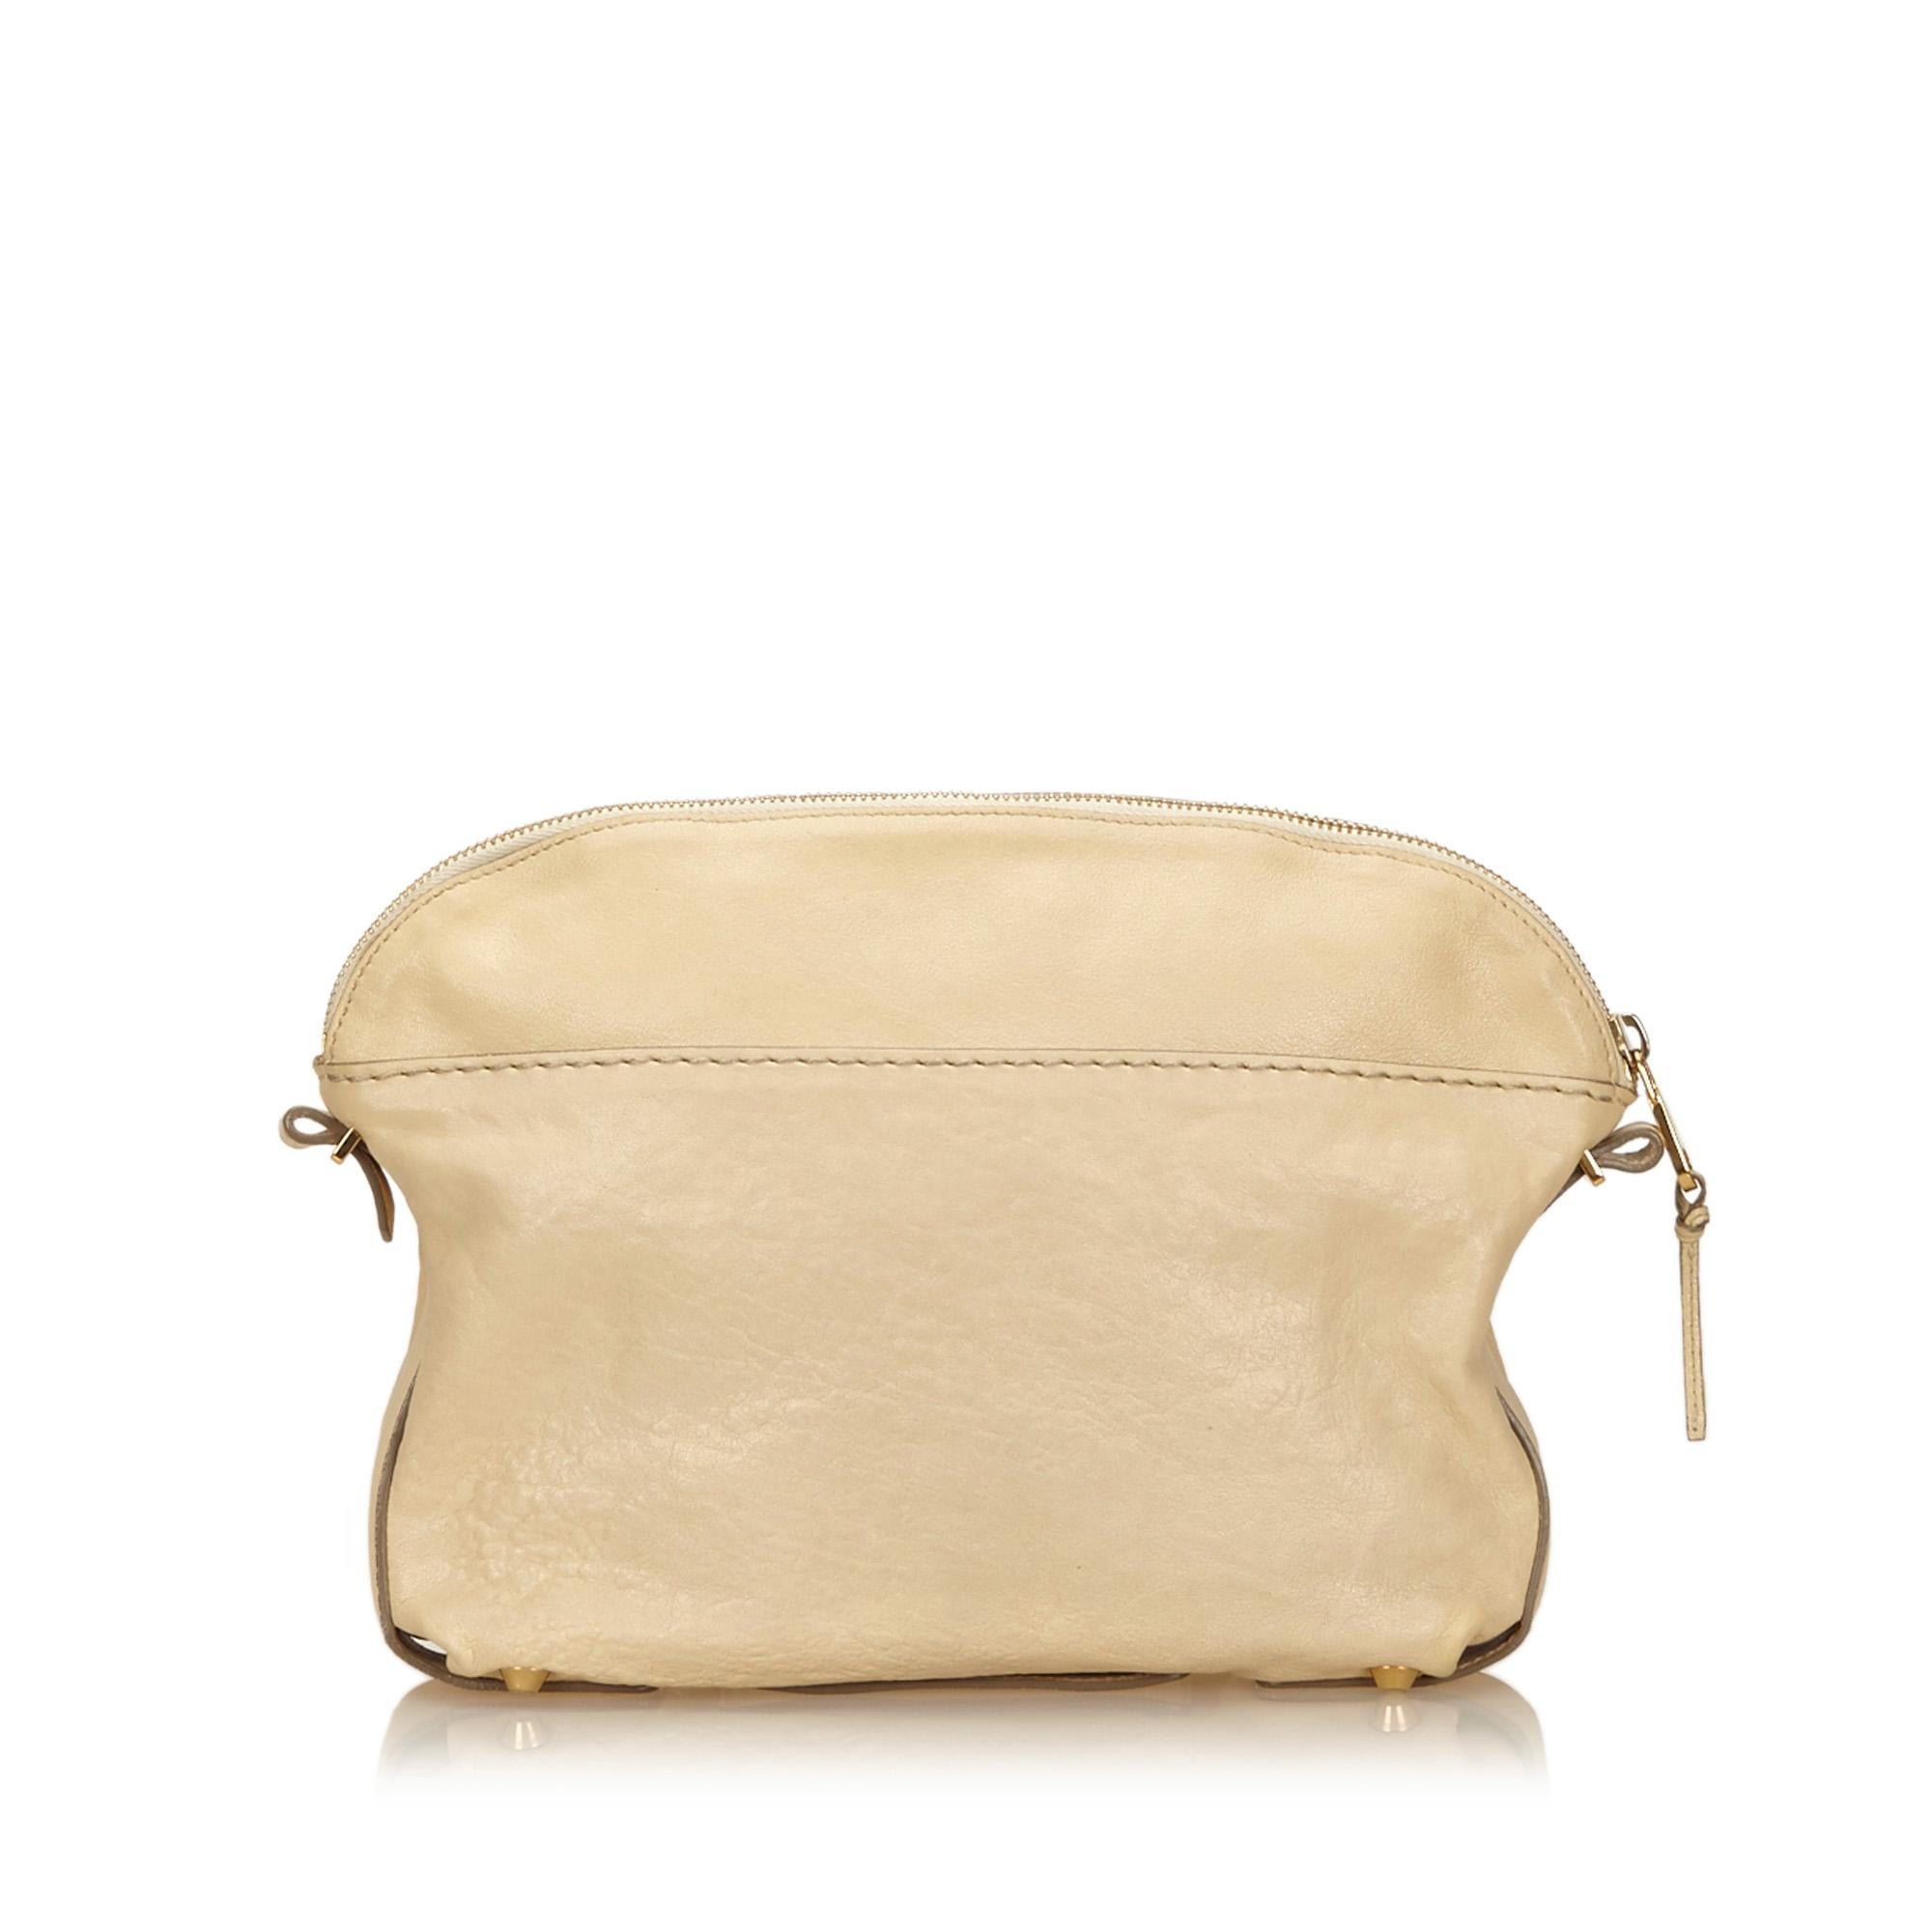 Beige Vintage Authentic Chloe Leather Clutch w Dust Bag Authenticity Card SMALL  For Sale